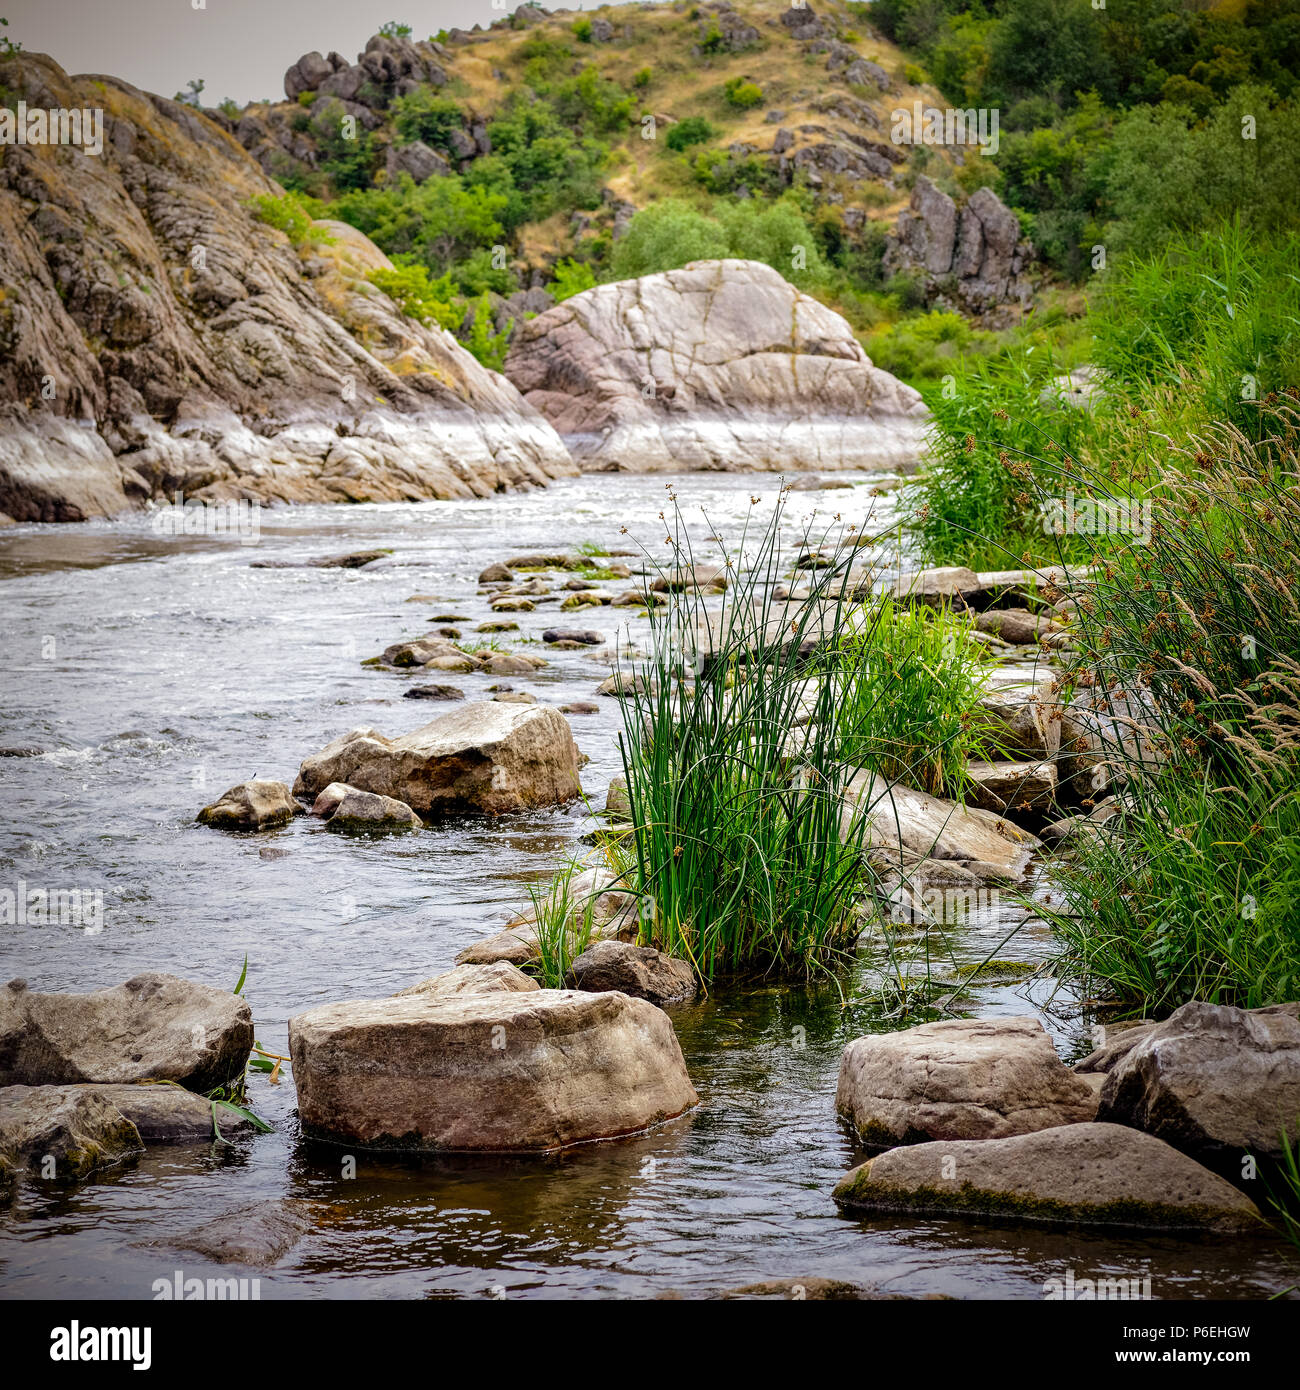 Forest river water scene. River mountain rapid flow of water. Reed rocks stones. Stock Photo